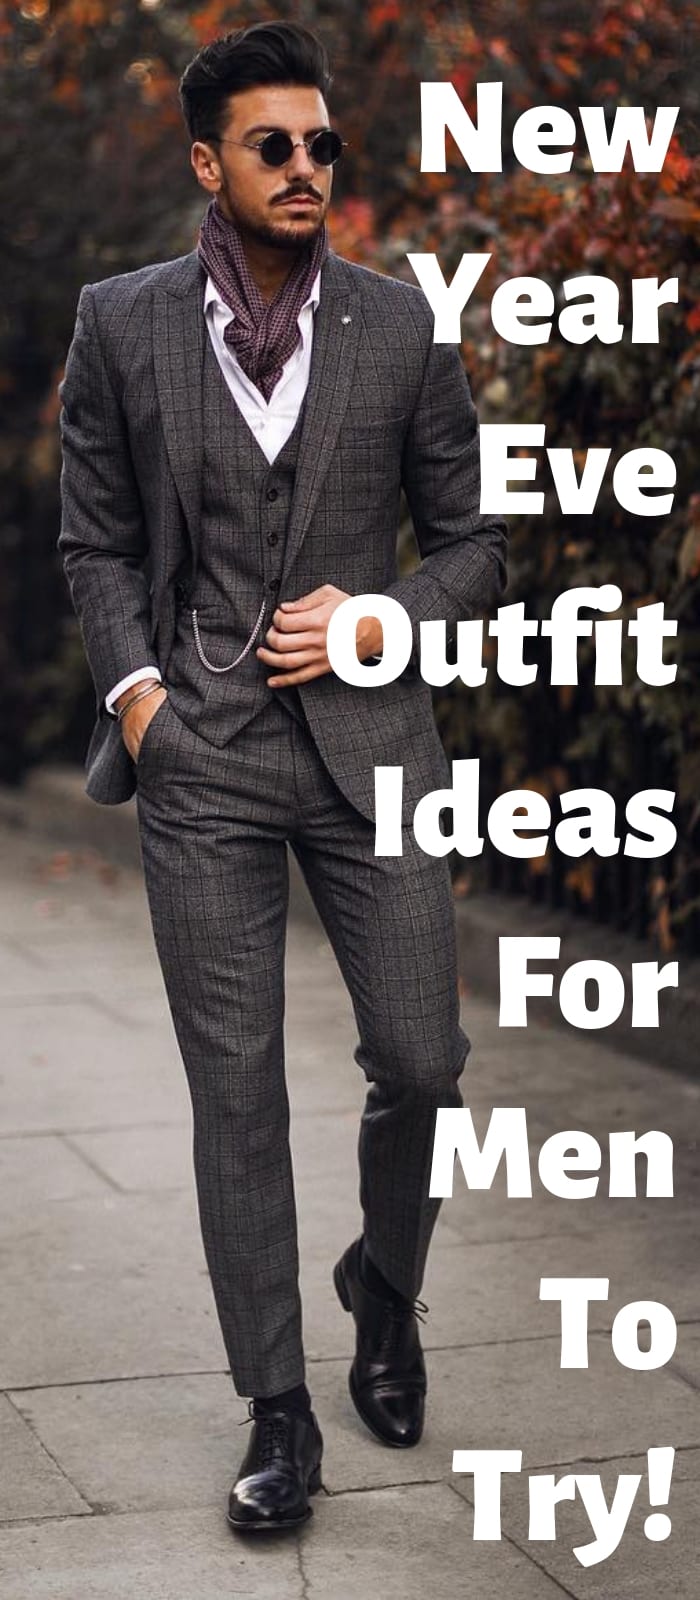 New Year Eve Outfit Ideas For Men To Try